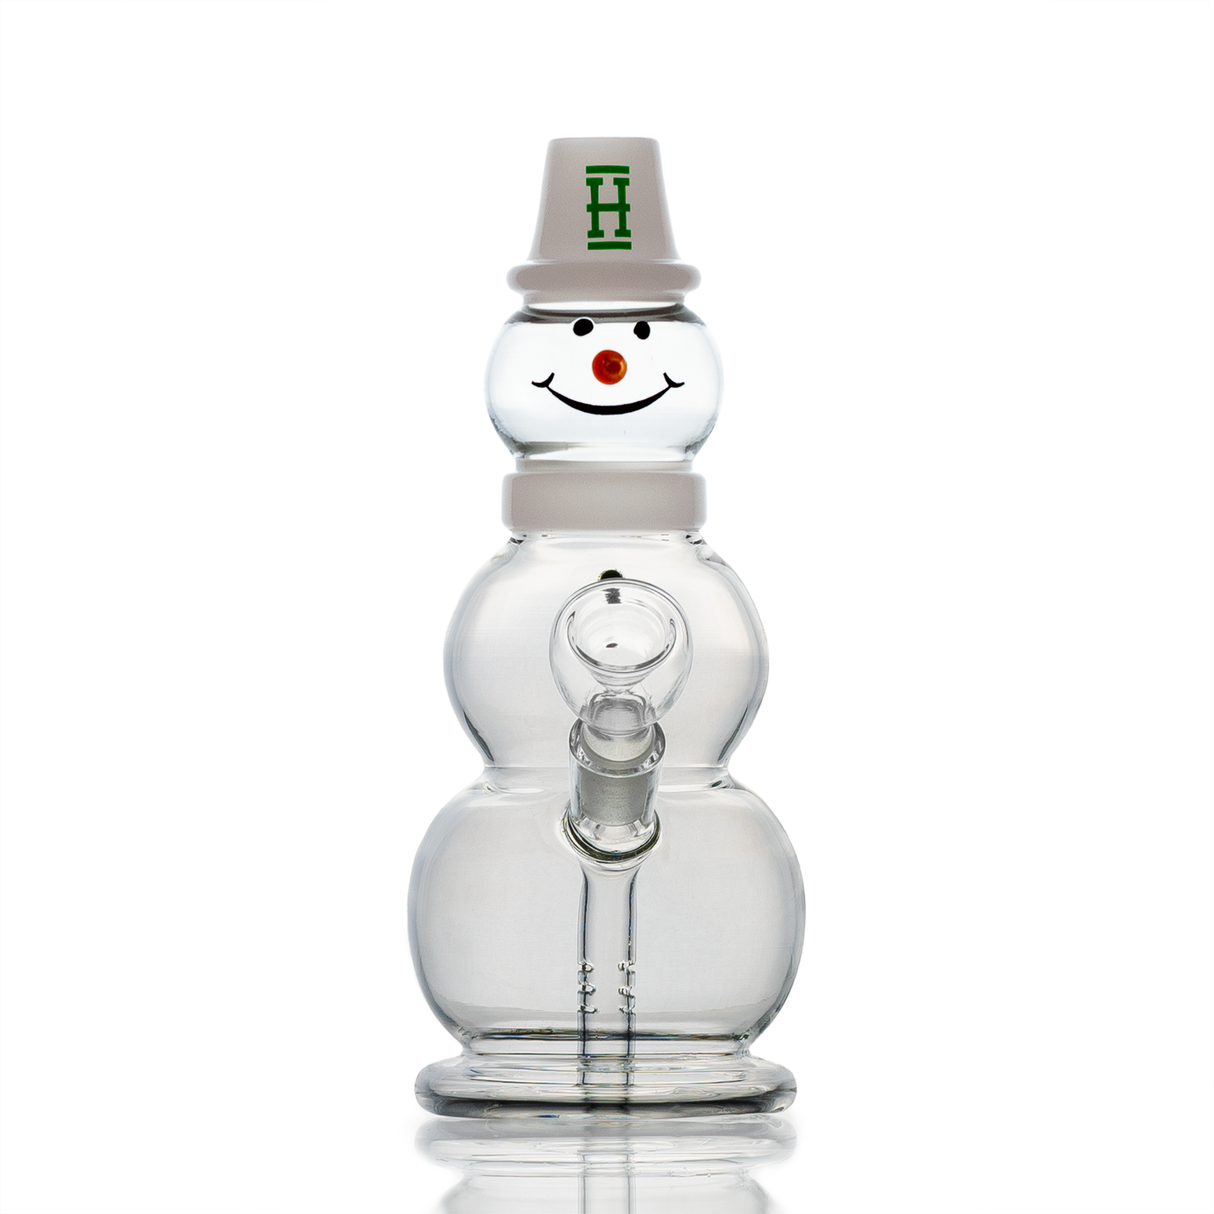 Hemper Snowman Bong, 18" Tall with 45 Degree Joint Angle, Front View on Seamless White Background